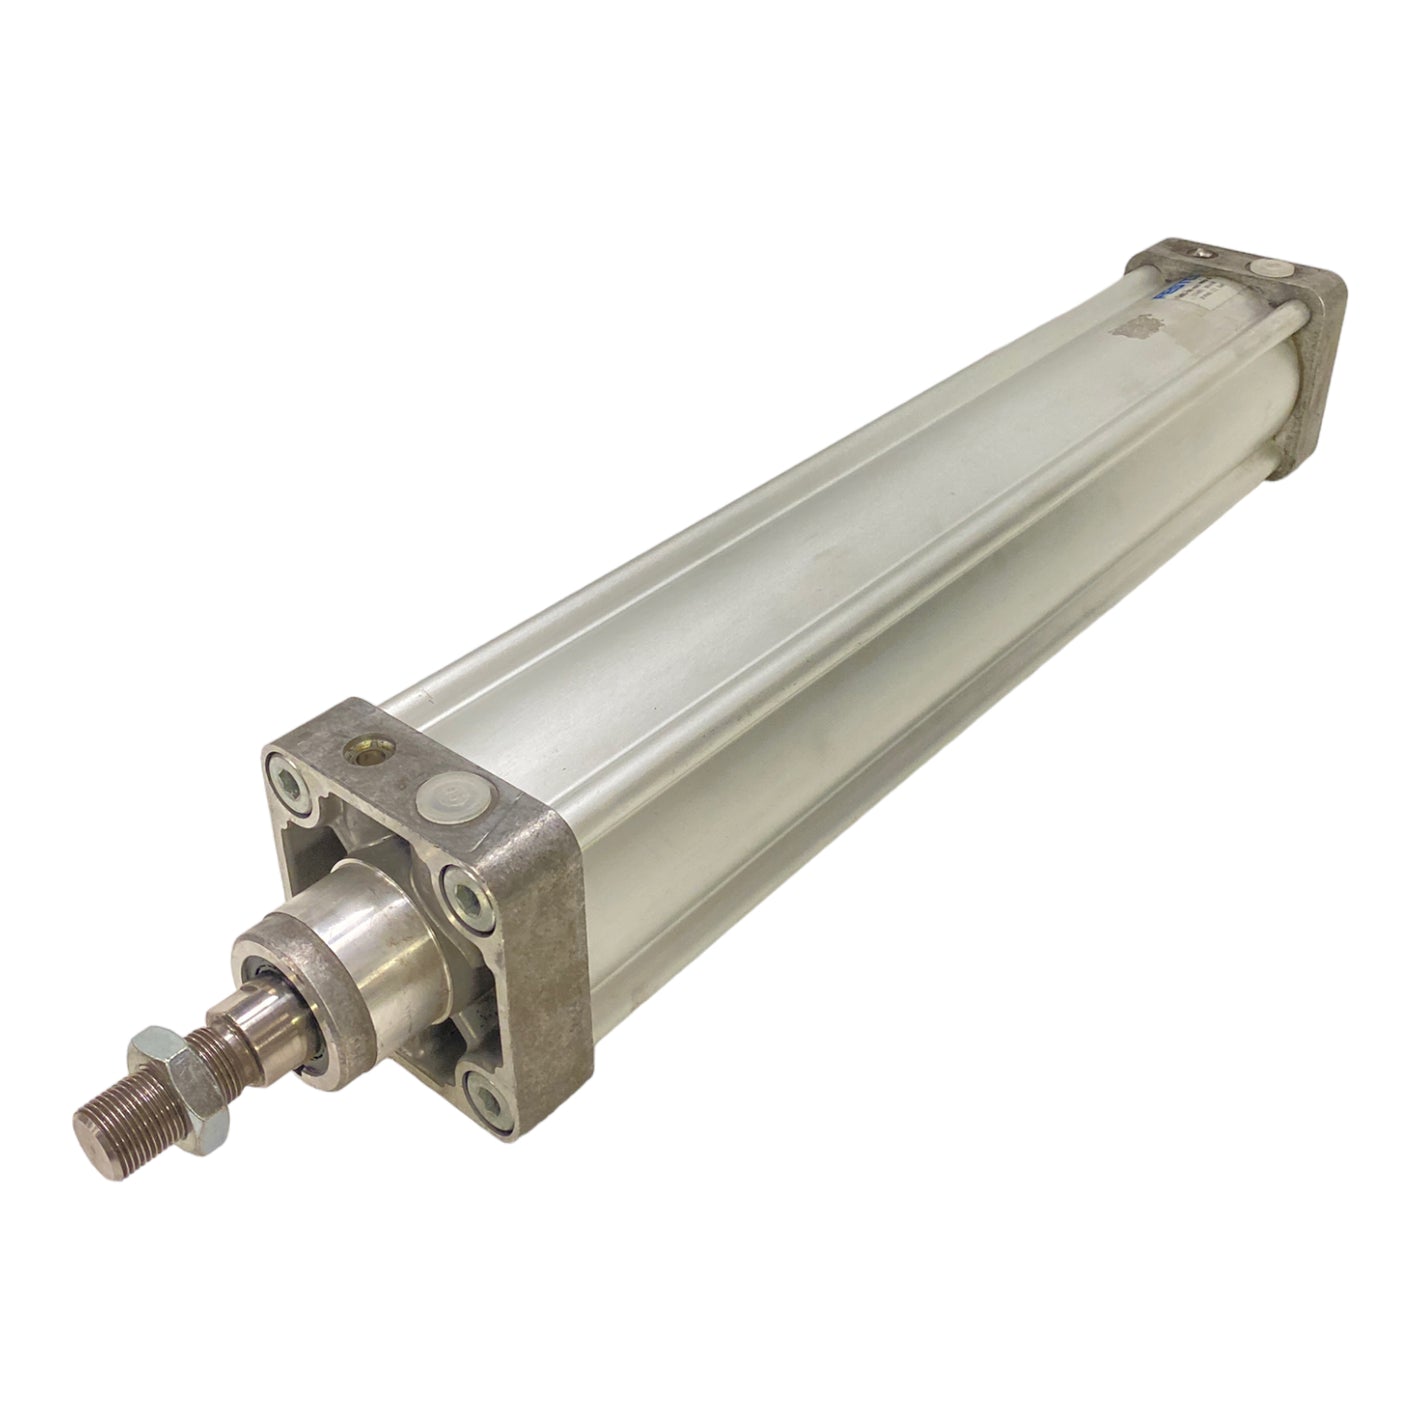 Festo DNU-80-400-PPV-A standard cylinder 32481 0.3…12bar double-acting 80mm M20x1.5 